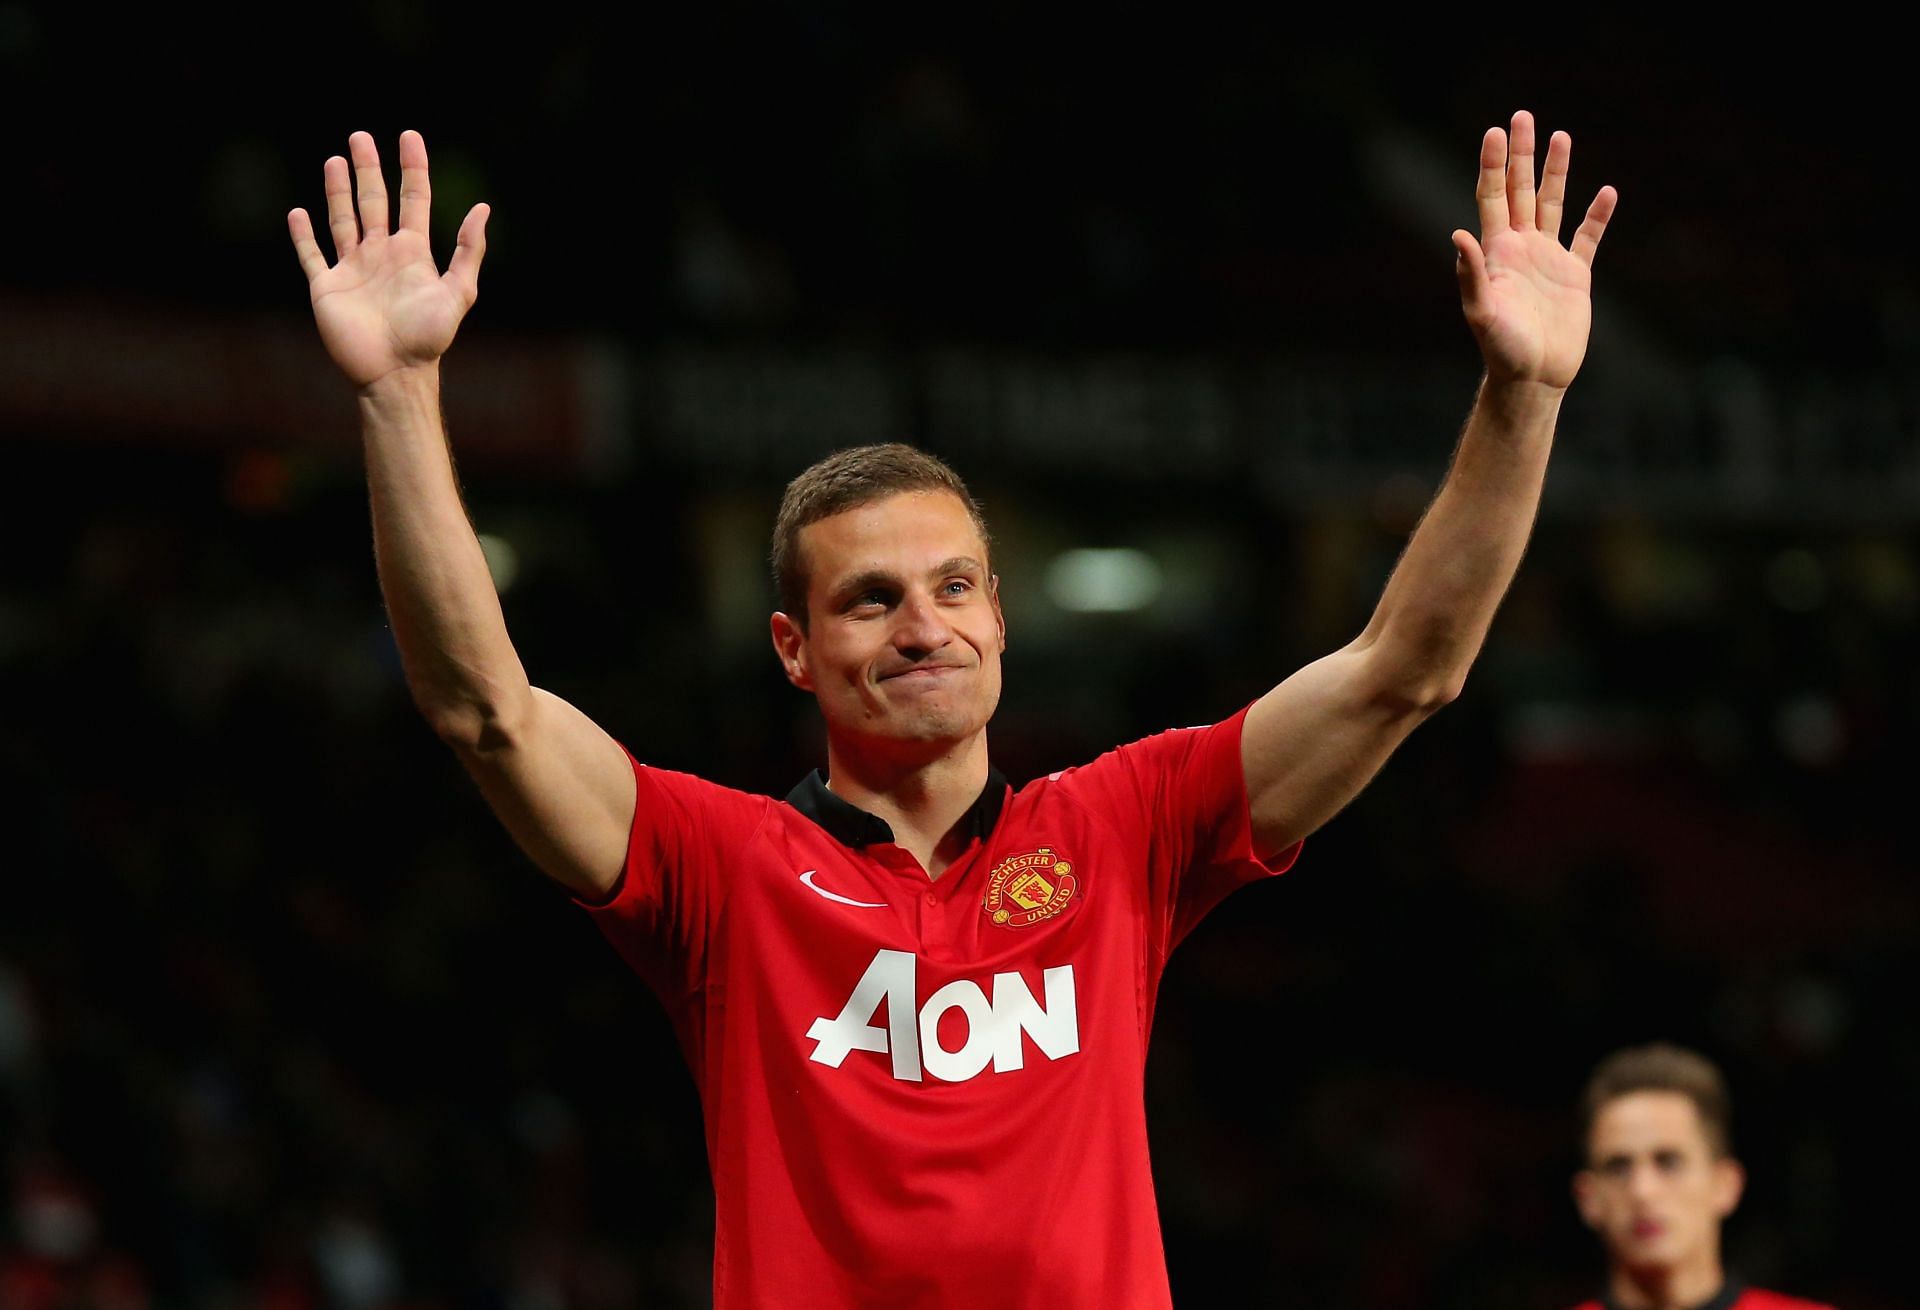 Liverpool talks were on until Vidic received an offer from Manchester United